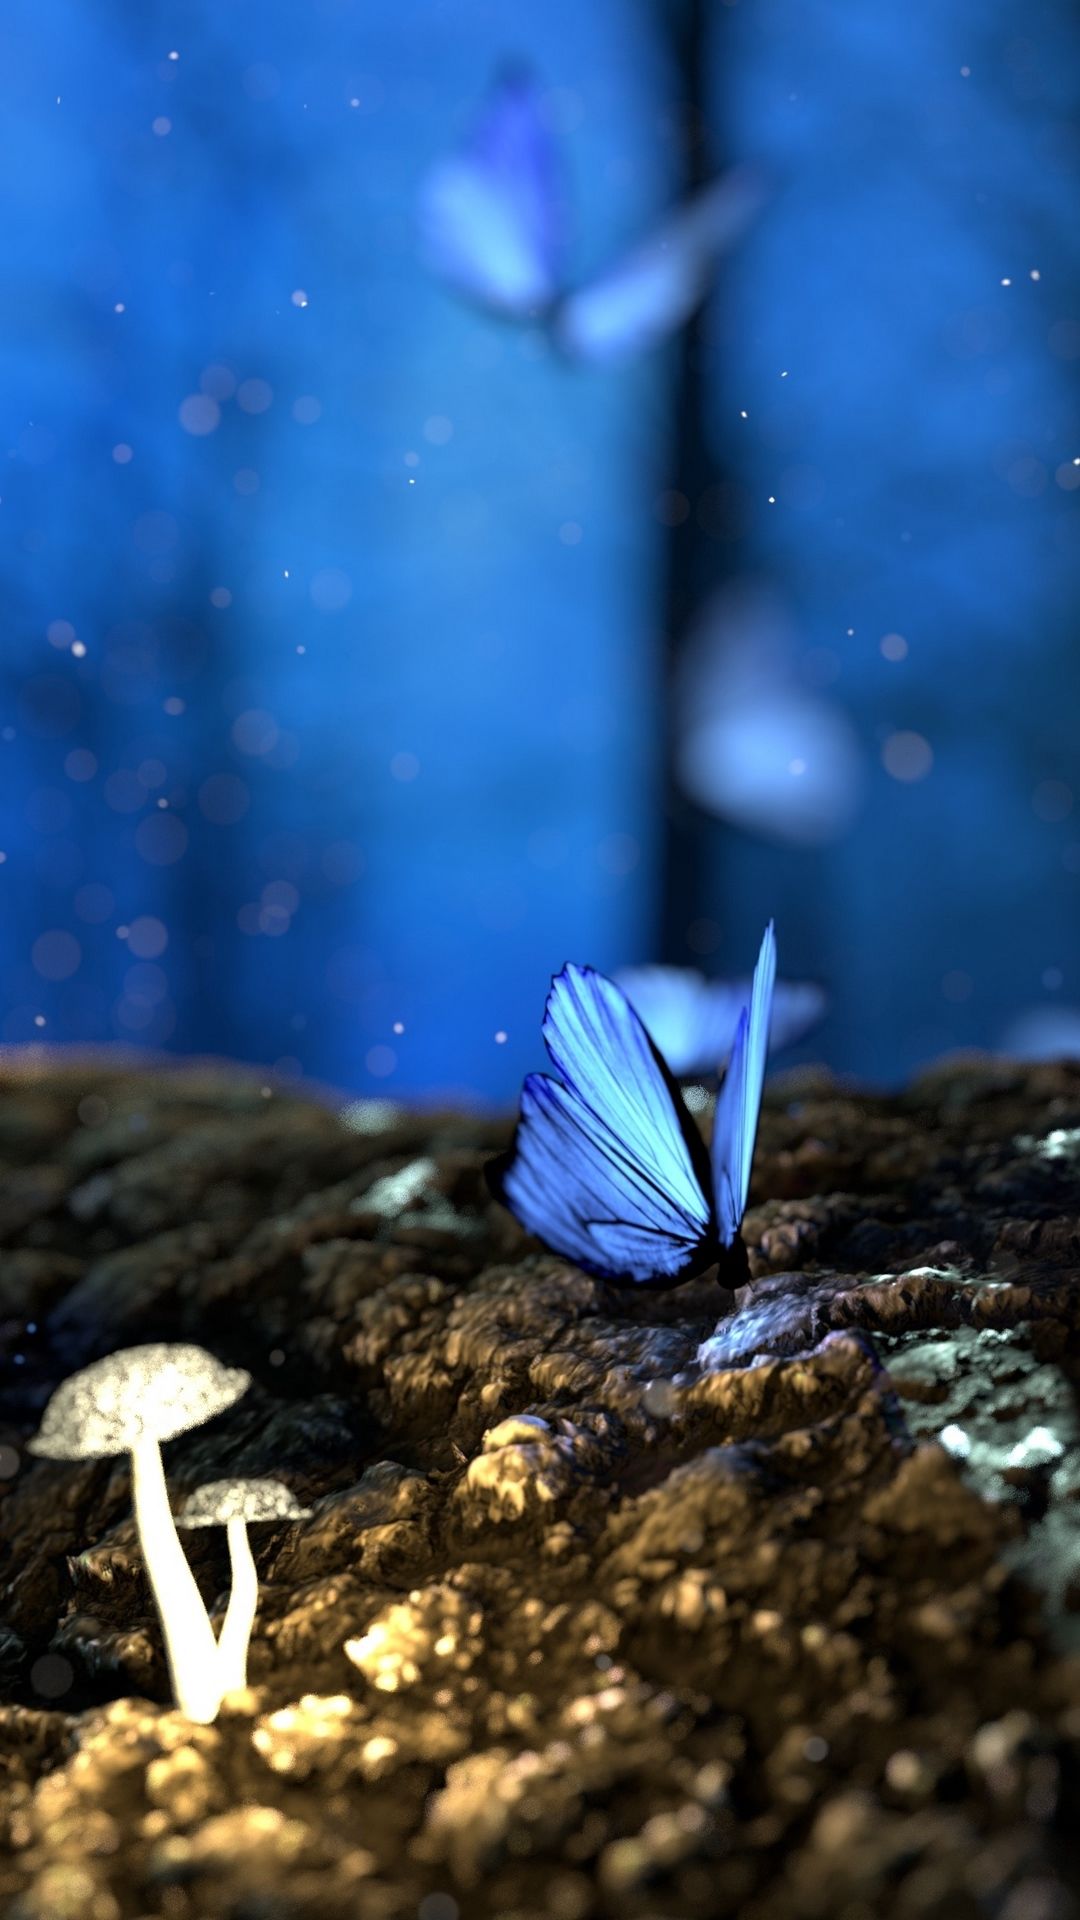 butterfly live wallpaper,blue,nature,butterfly,insect,moths and butterflies